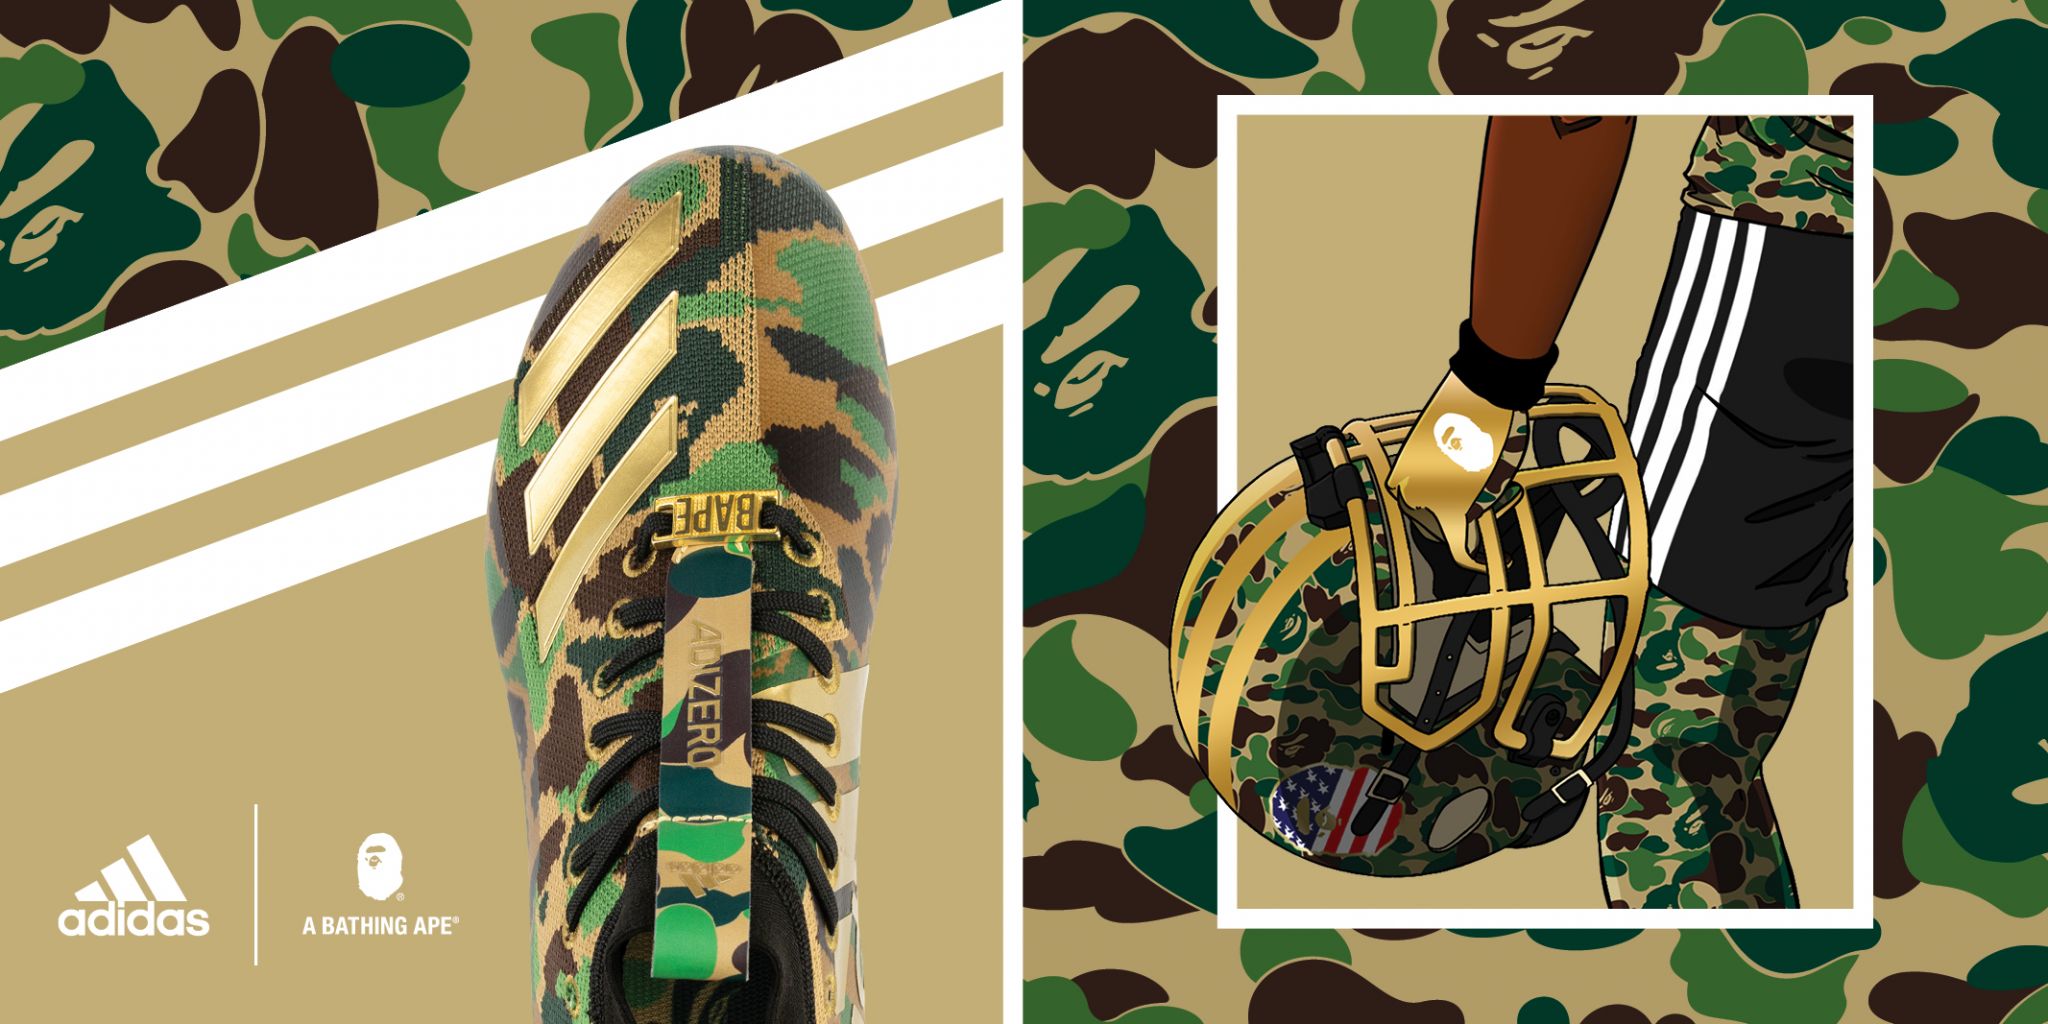 The adidas x Super Bowl collection is insane